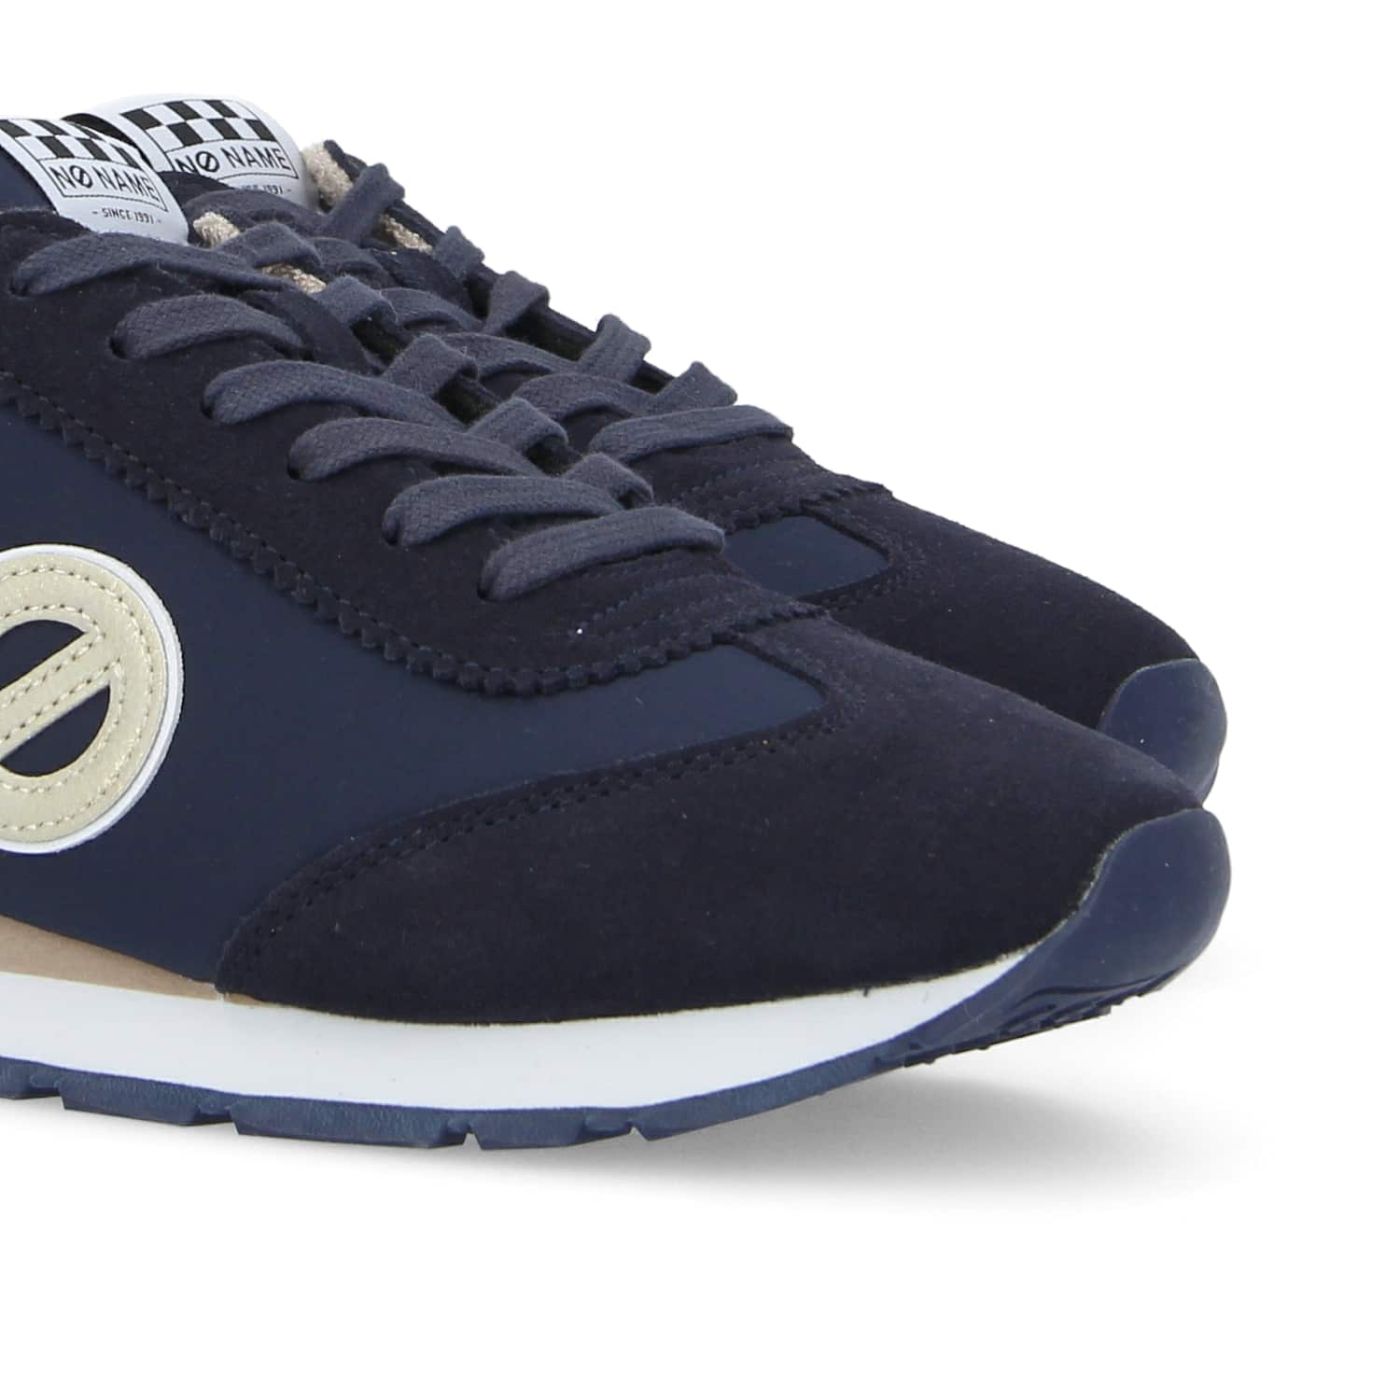 CITY RUN JOGGER - SQUARE/SUEDE - NAVY